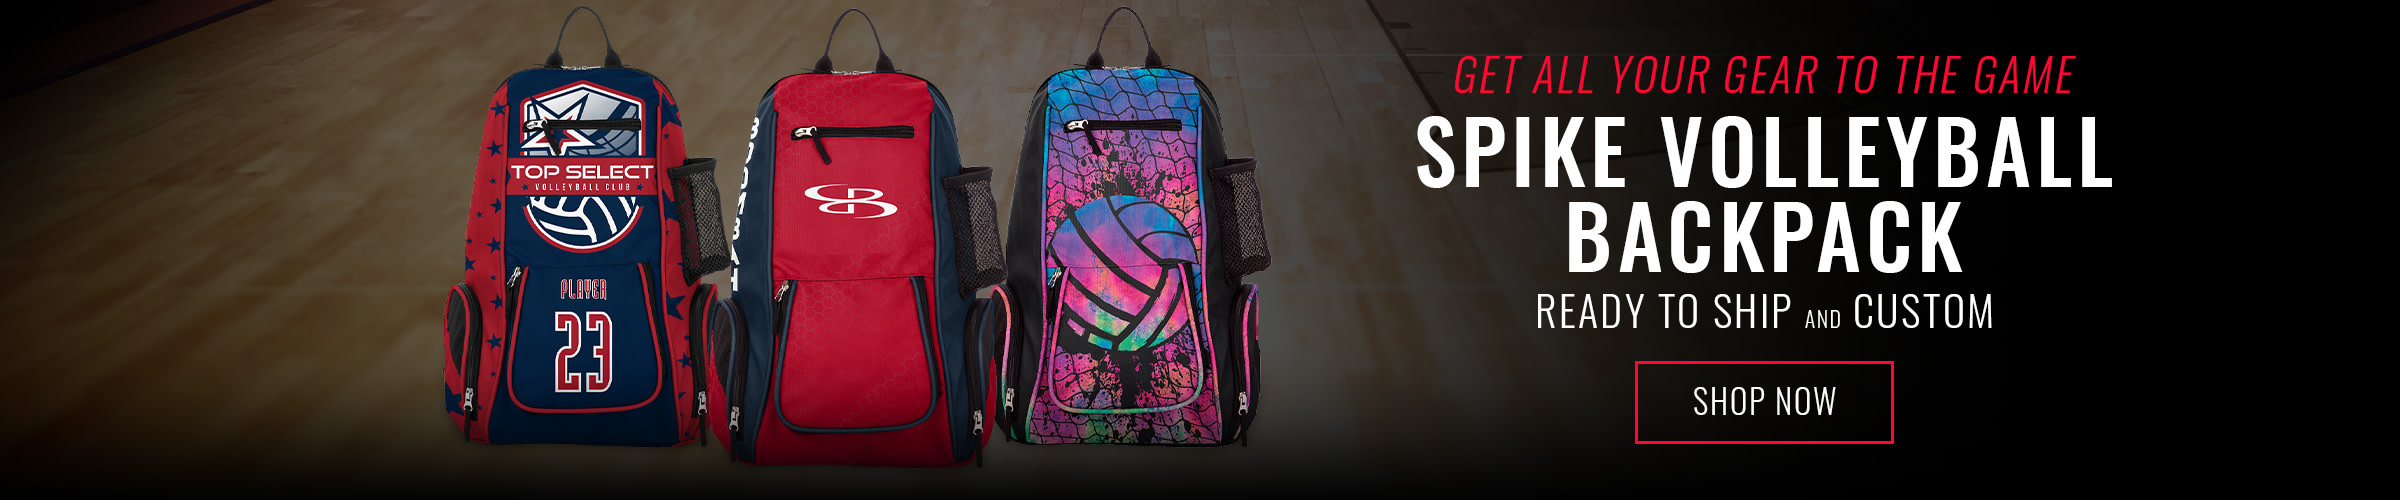 Spike Volleyball Backpacks - Shop Now